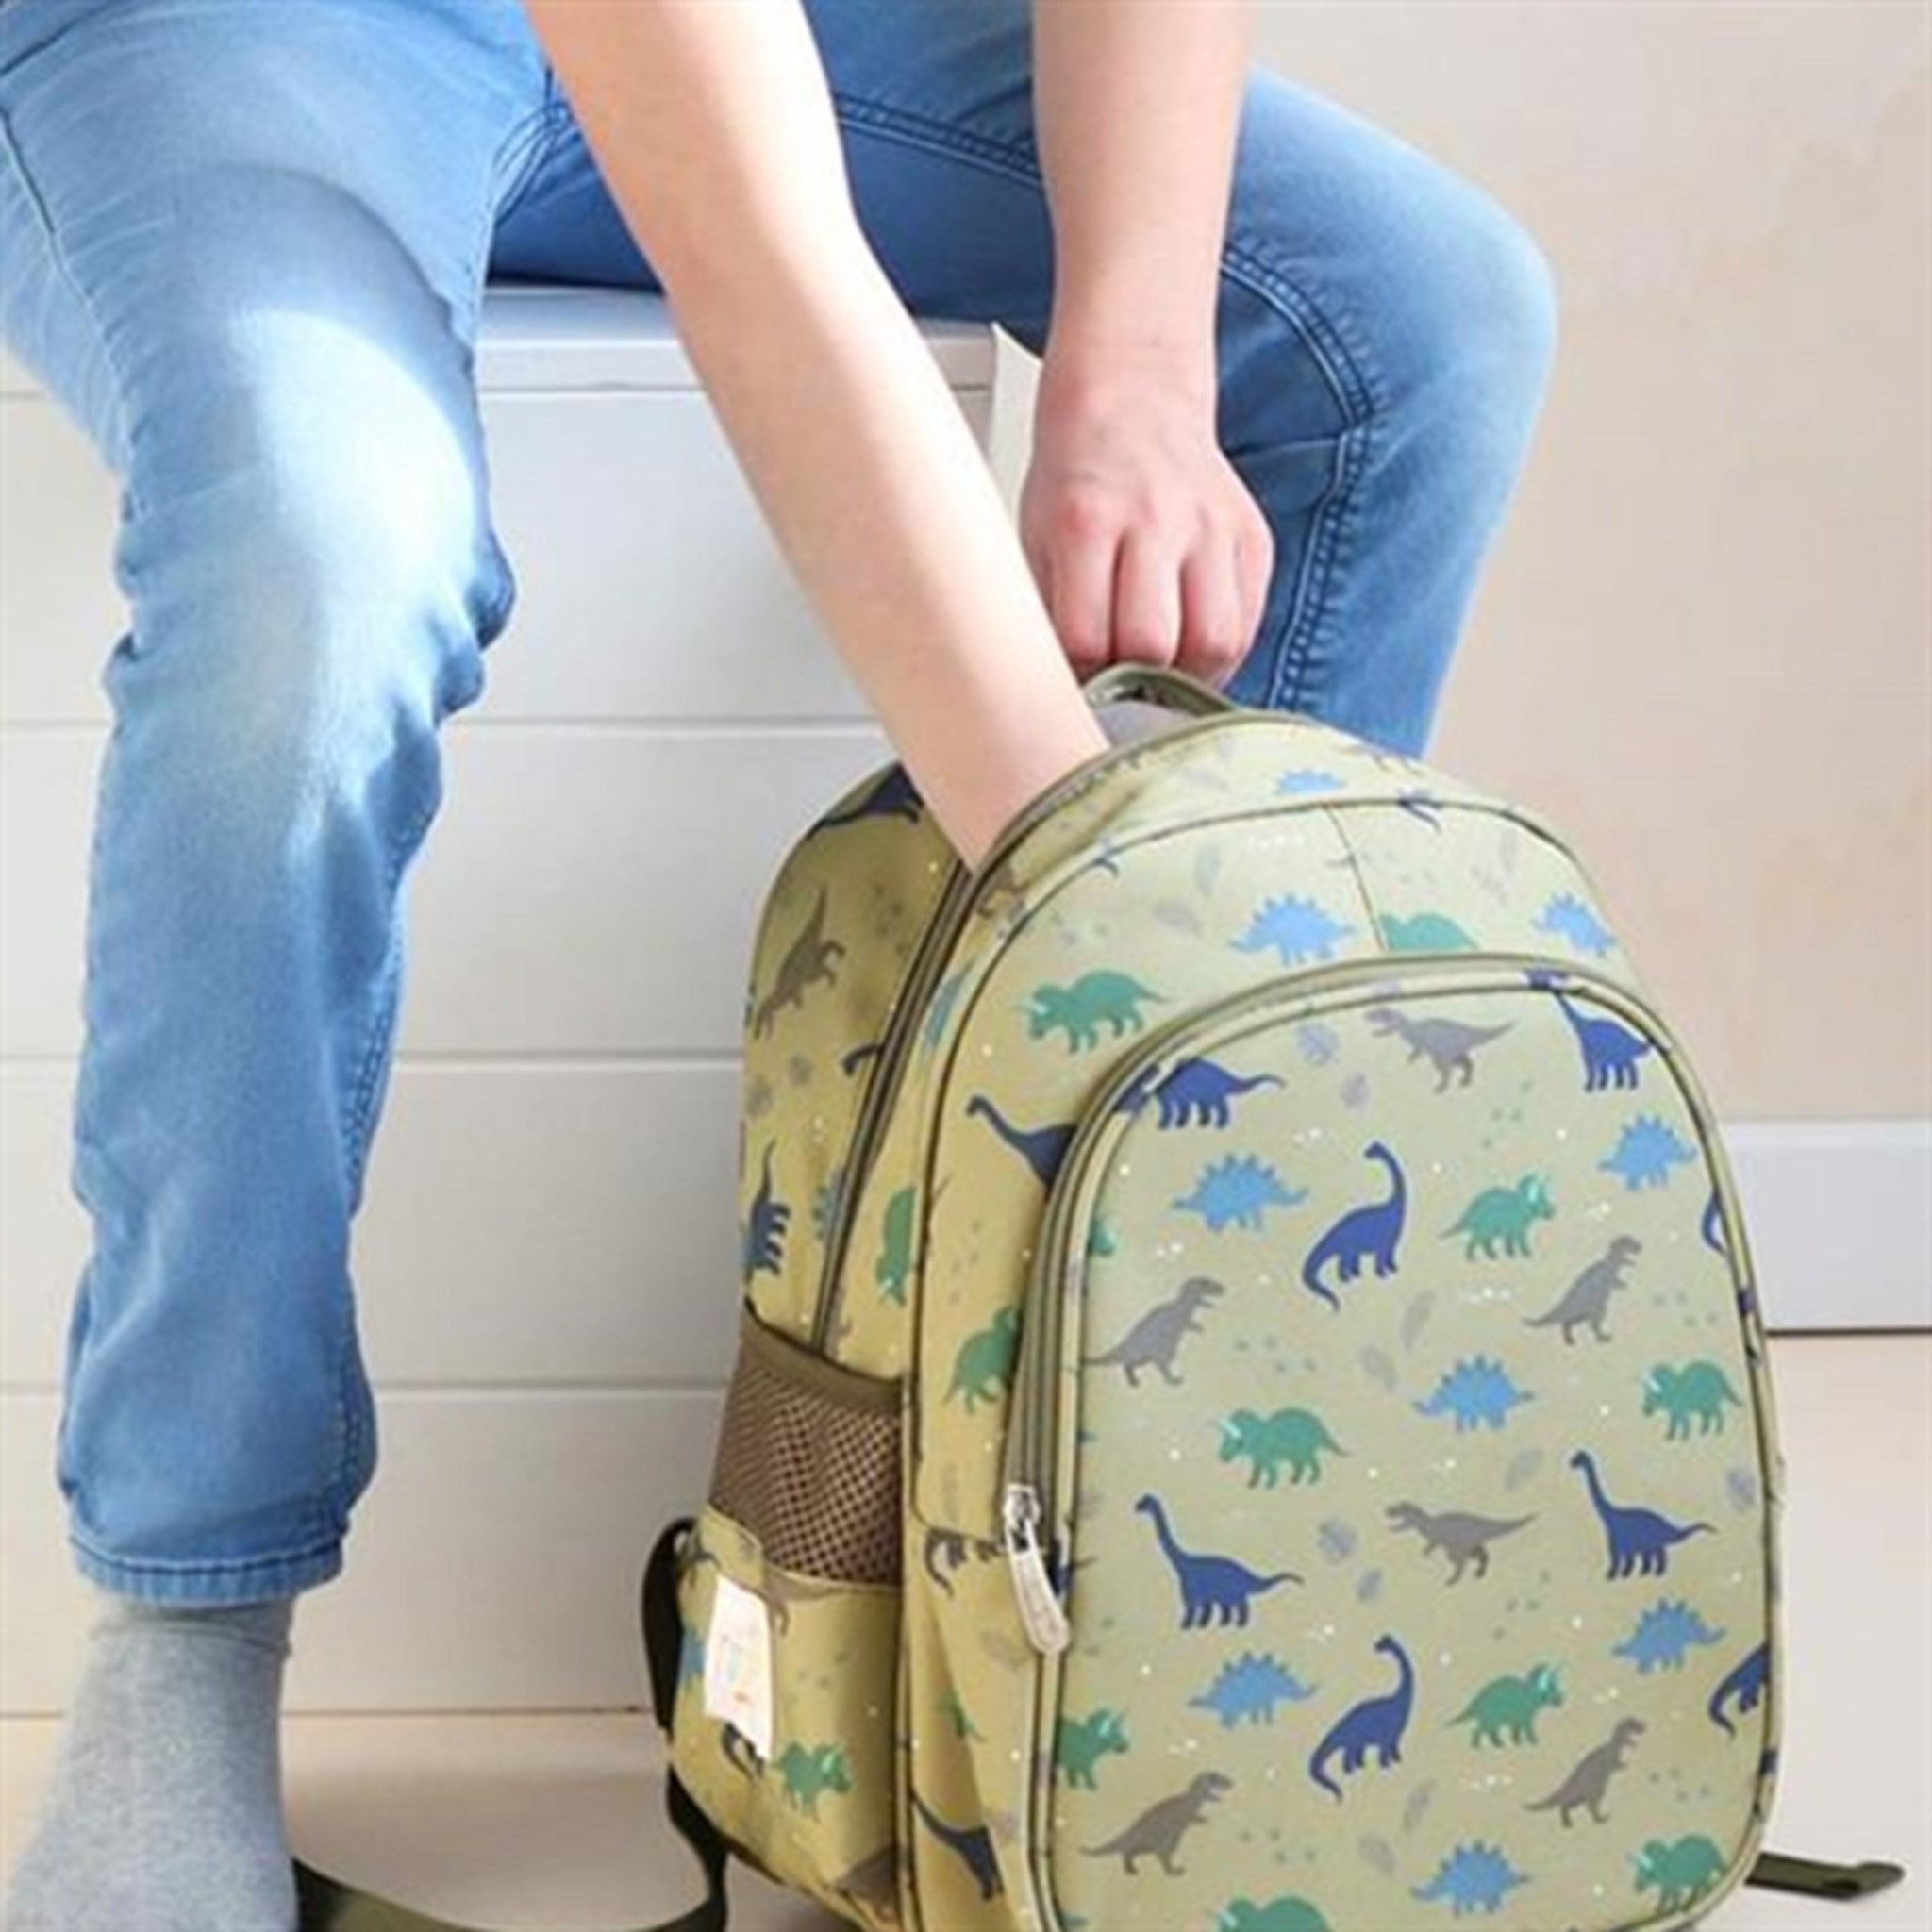 A Little Lovely Company Backpack Dinosaurs 2